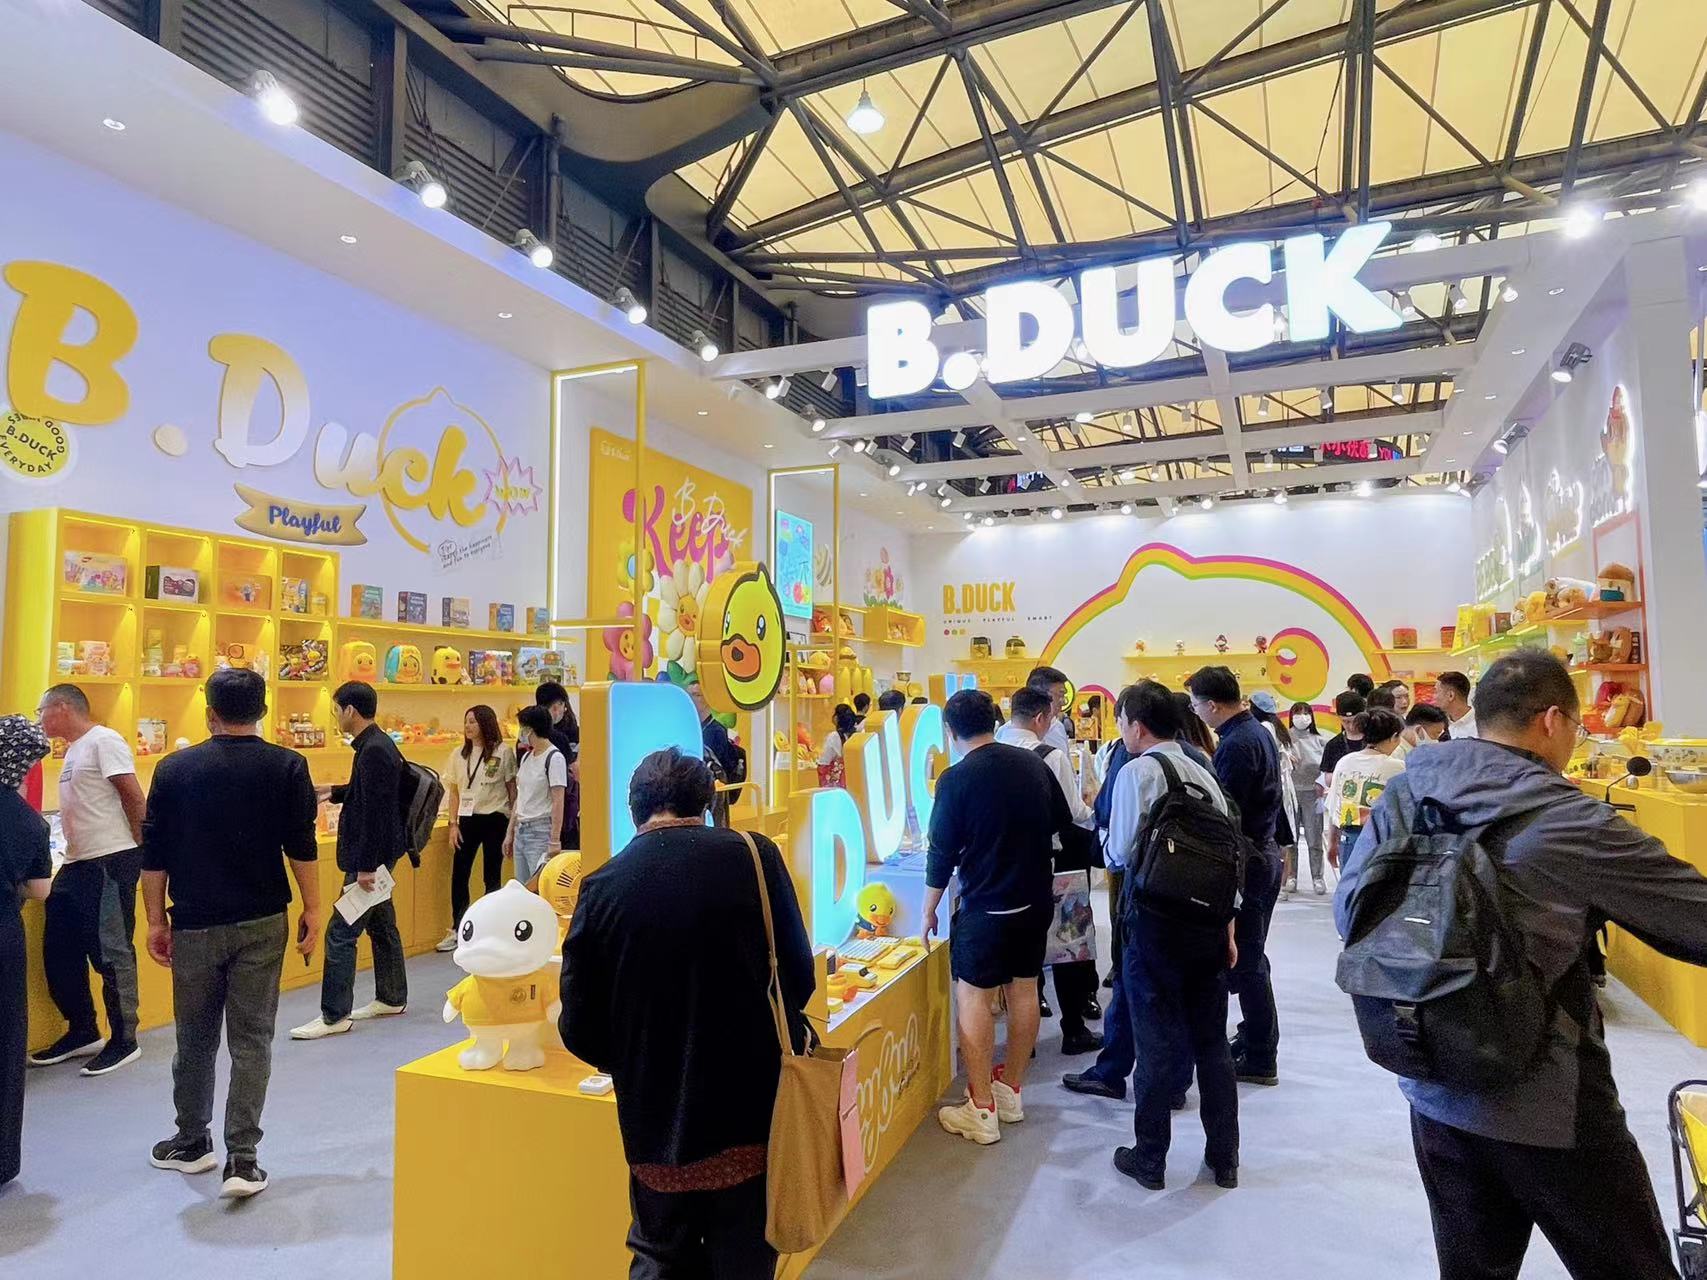 "Brand Authorization" magazine interviewed the general manager of B.Duck Licensing to disc